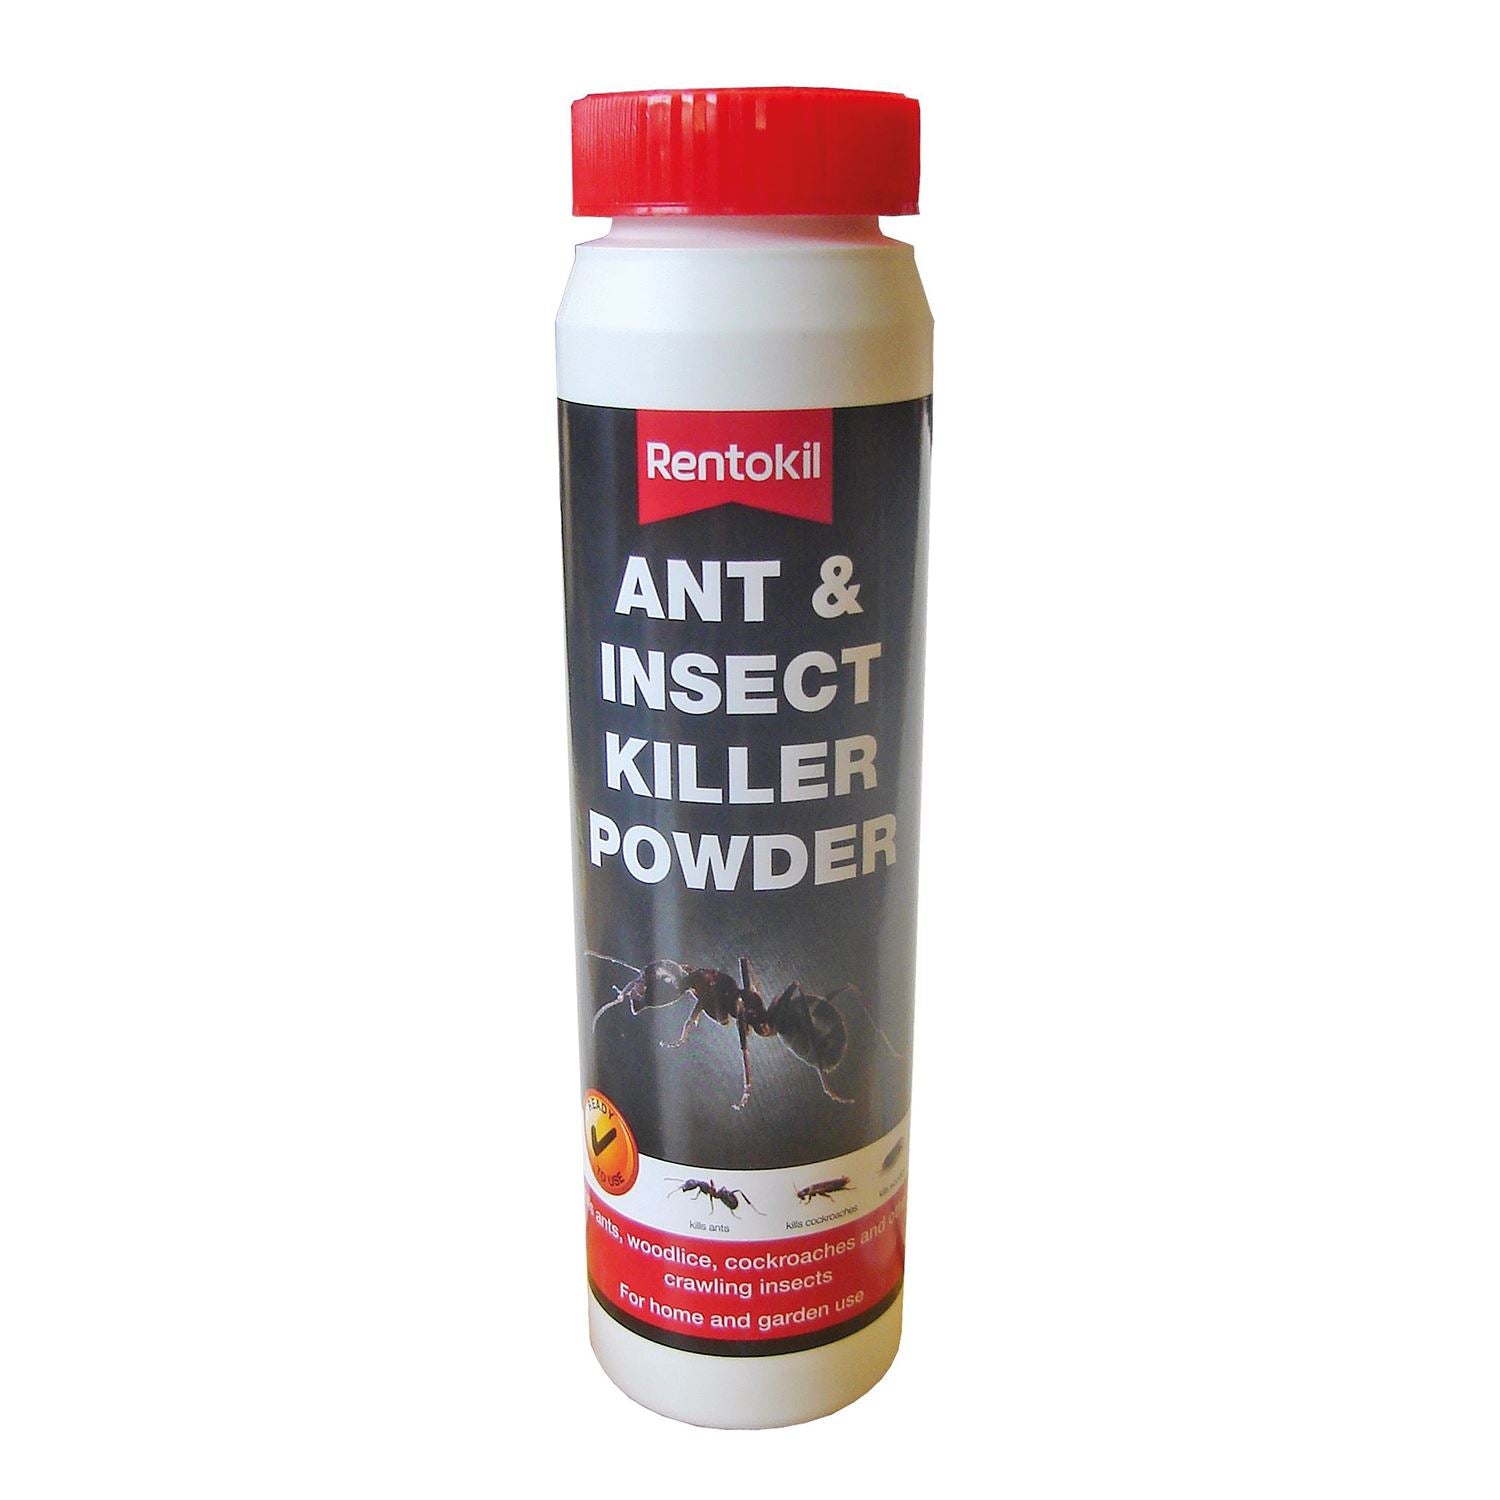 Rentokil Ant & Insect Killer Powder - Just Horse Riders